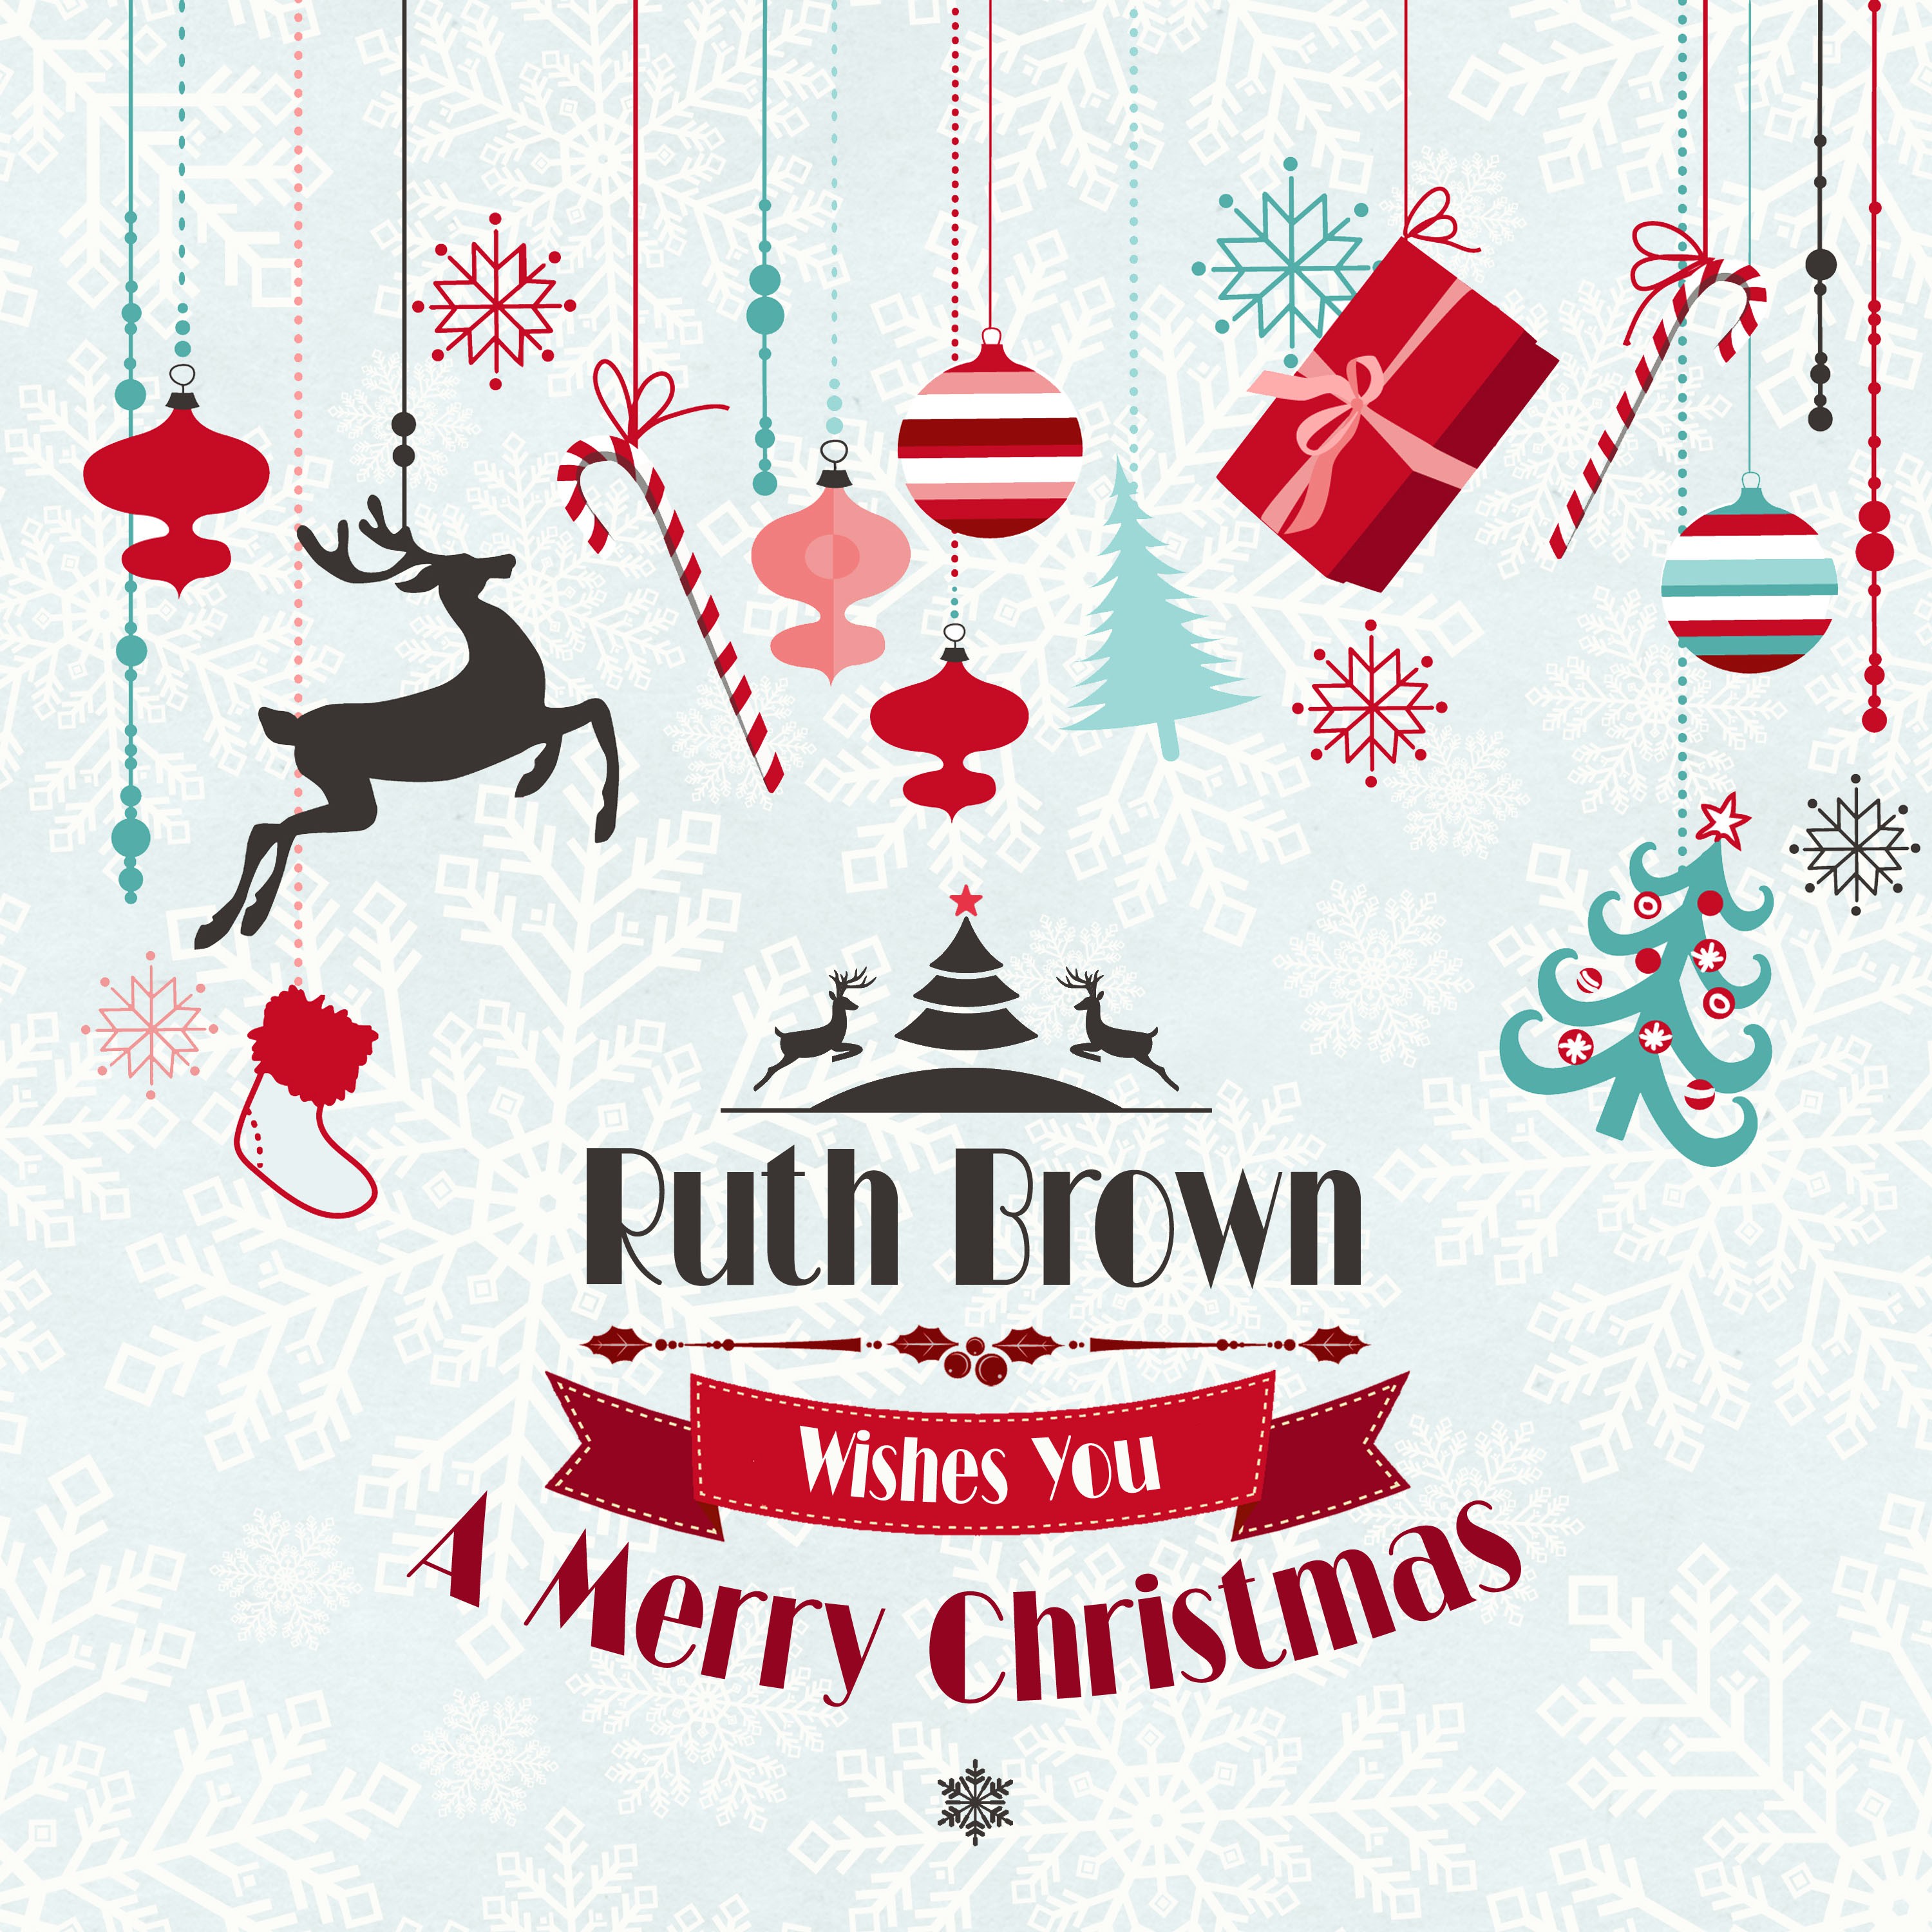 Ruth Brown Wishes You a Merry Christmas